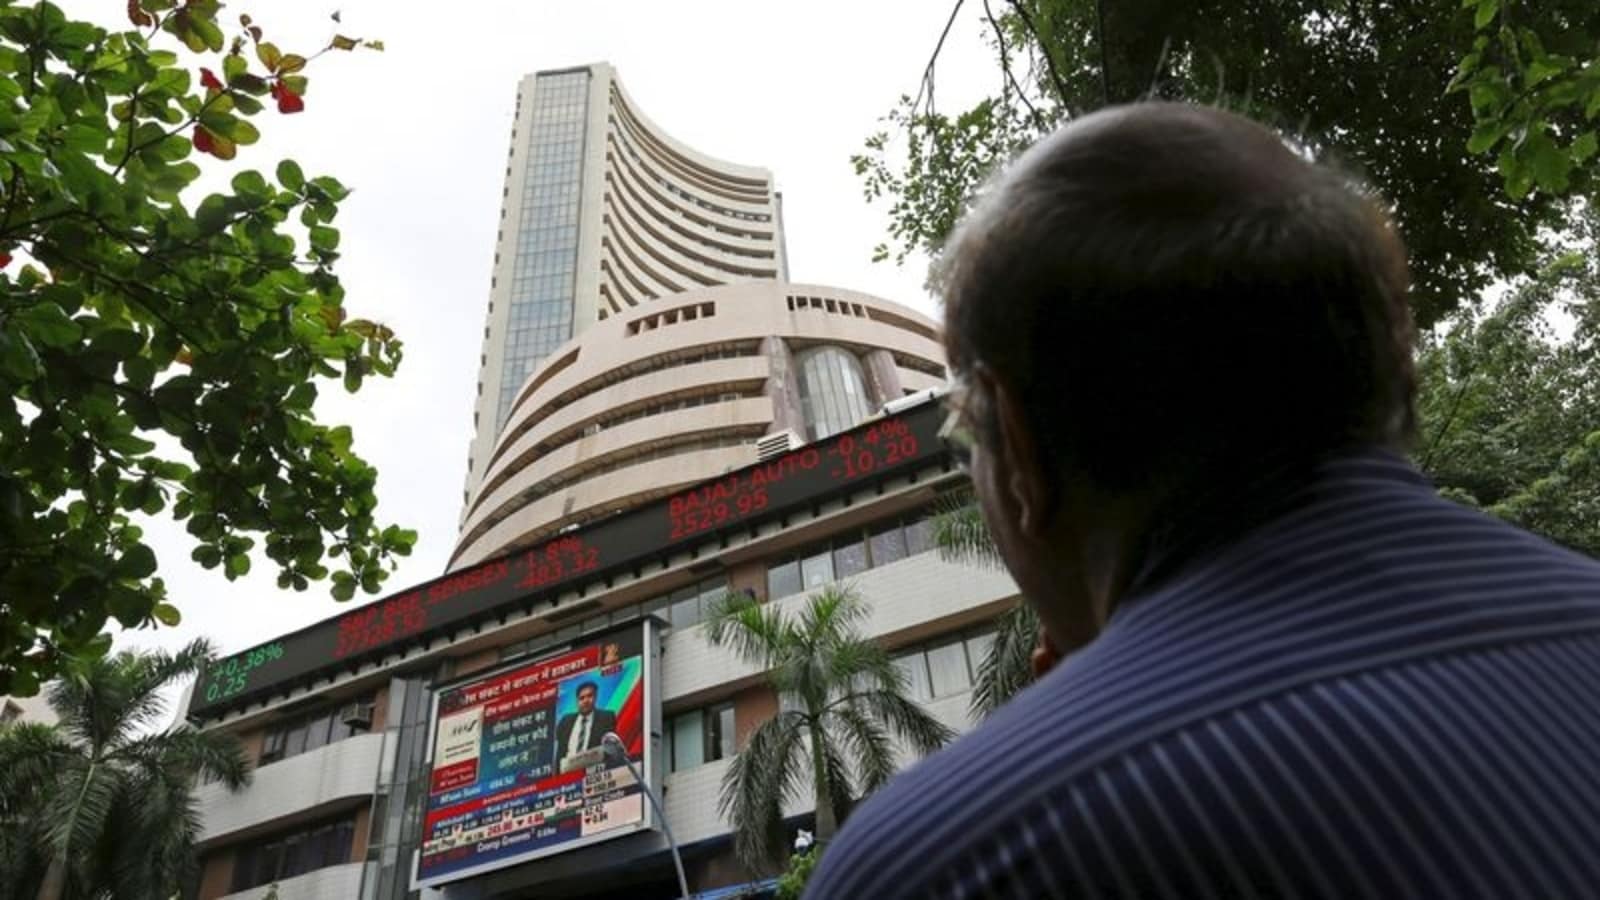 Shares inch up as RBI keeps rates steady to support growth